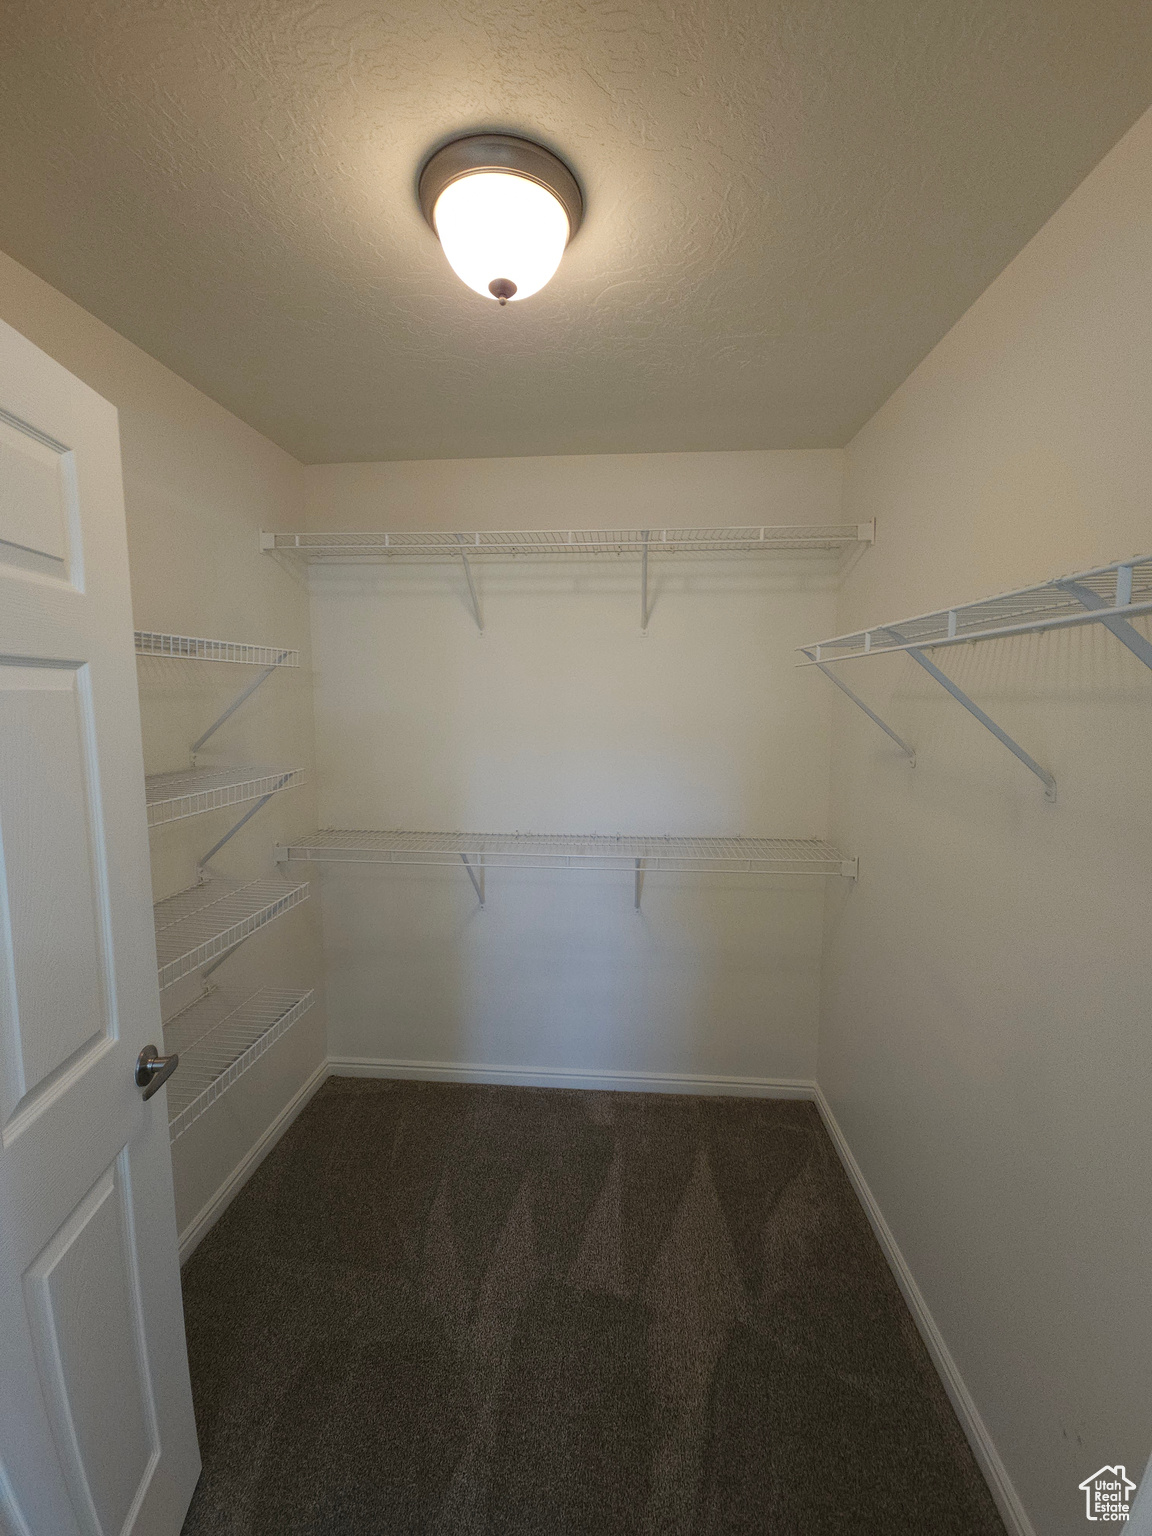 Large walk-in closet at the back of the Primary bath.